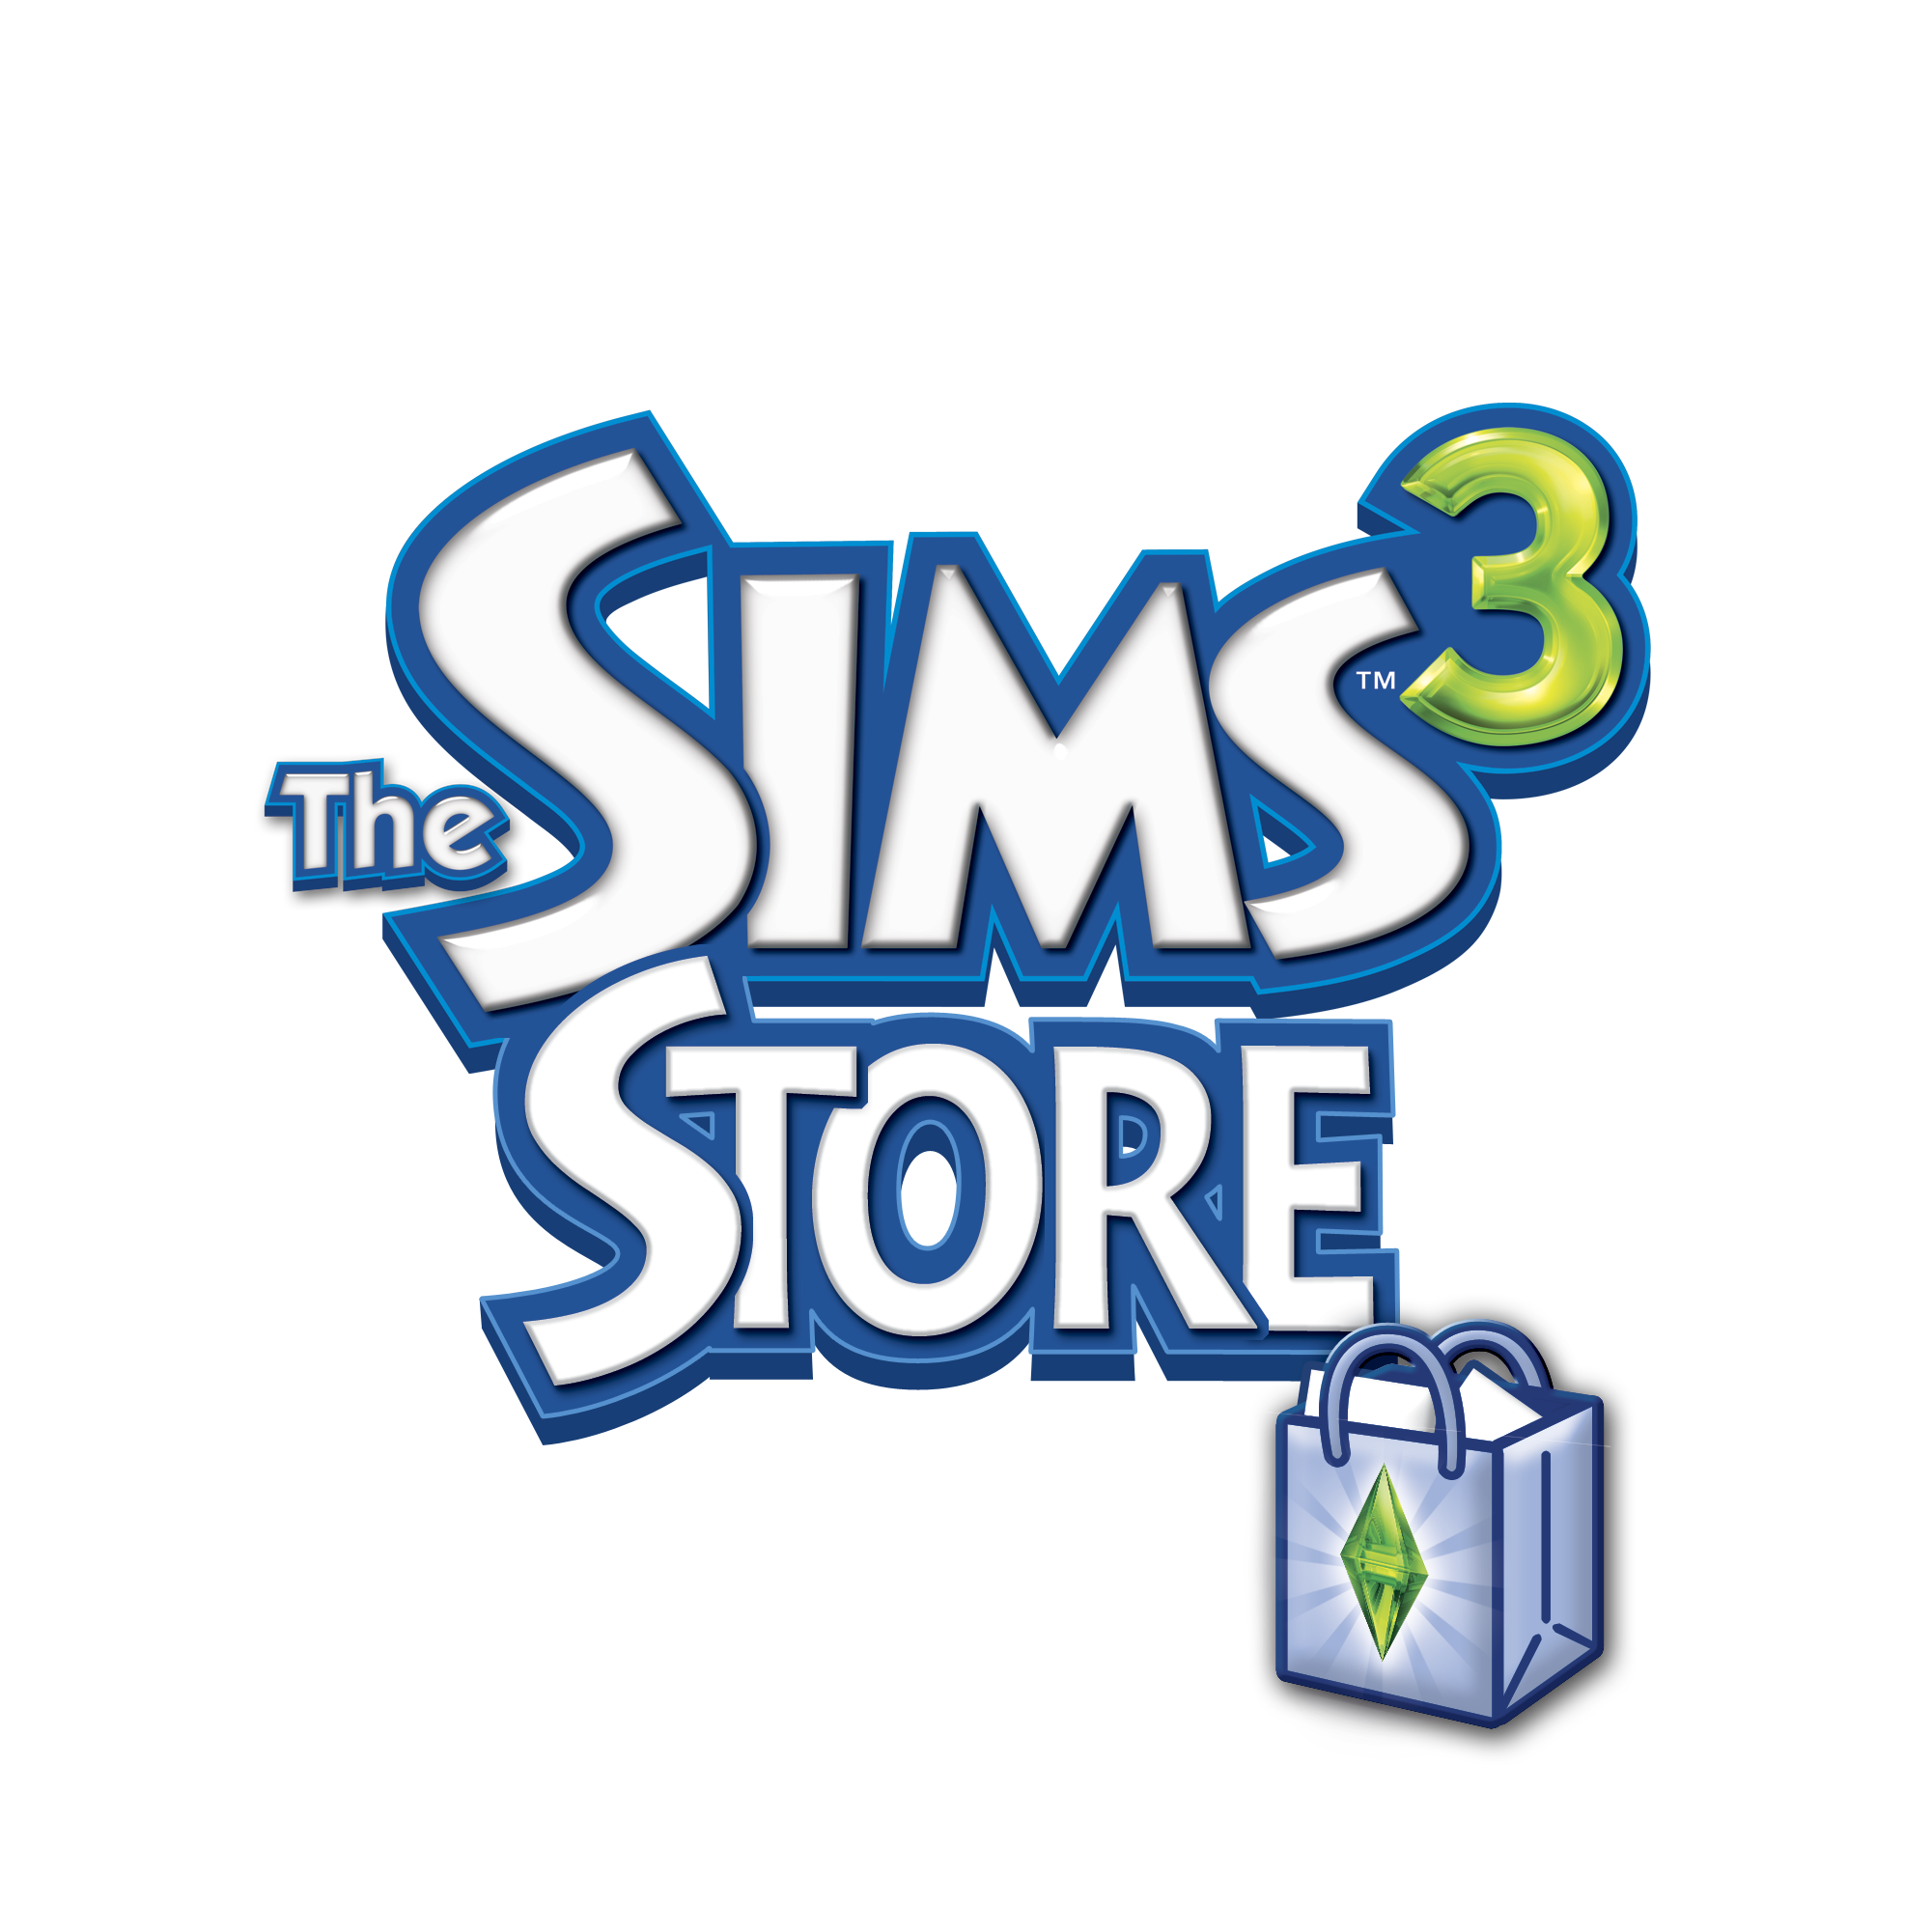 The sims complete collection digital download